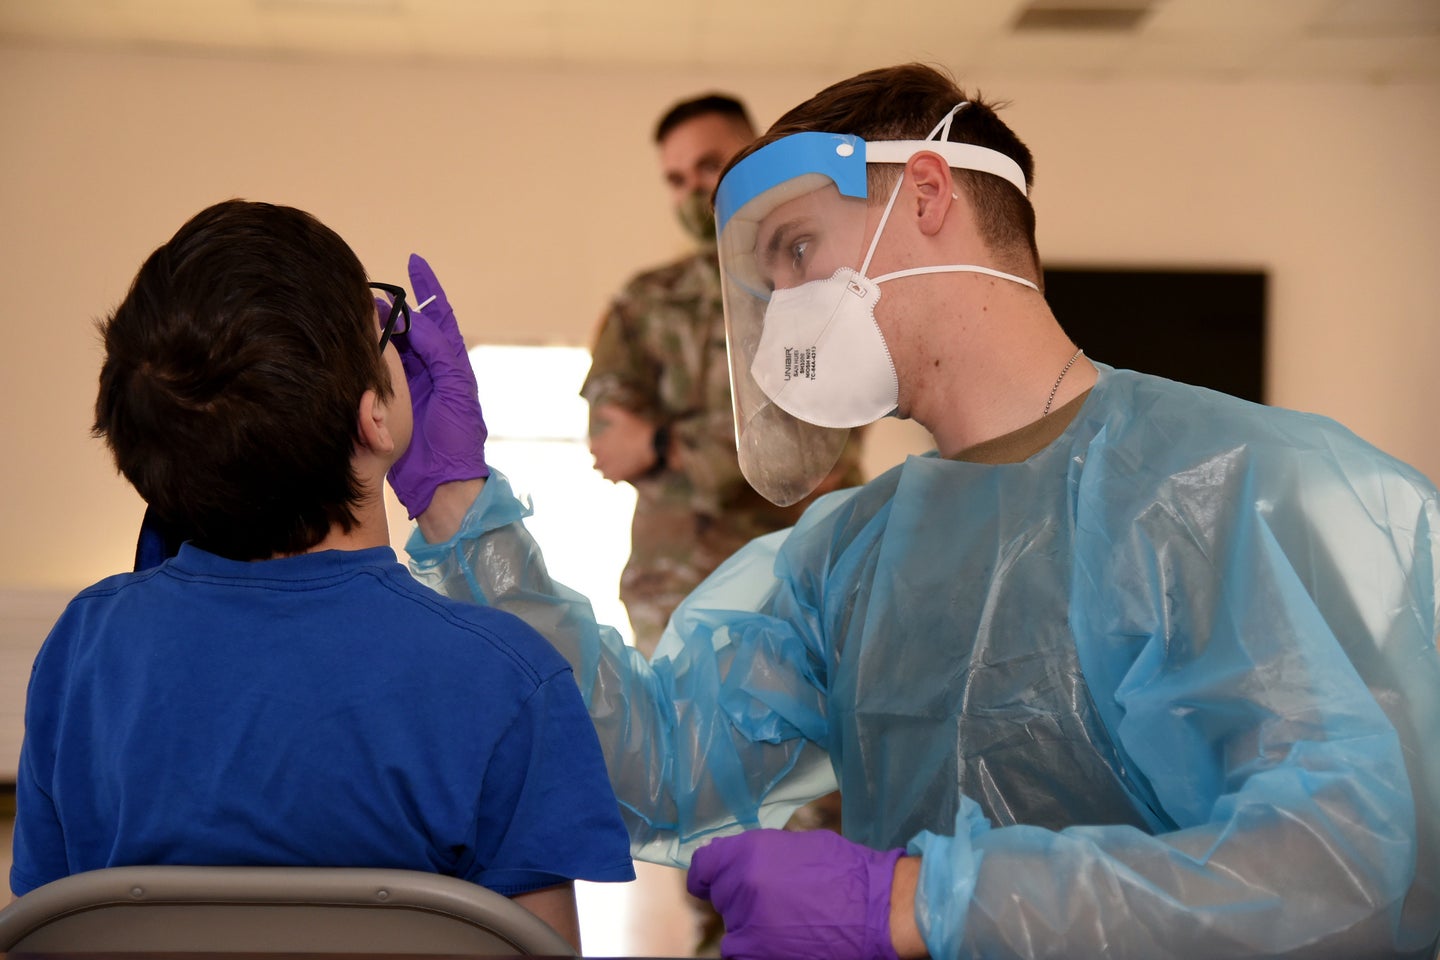 A kid gets a traditional nasal-swab test from a doctor in PPE